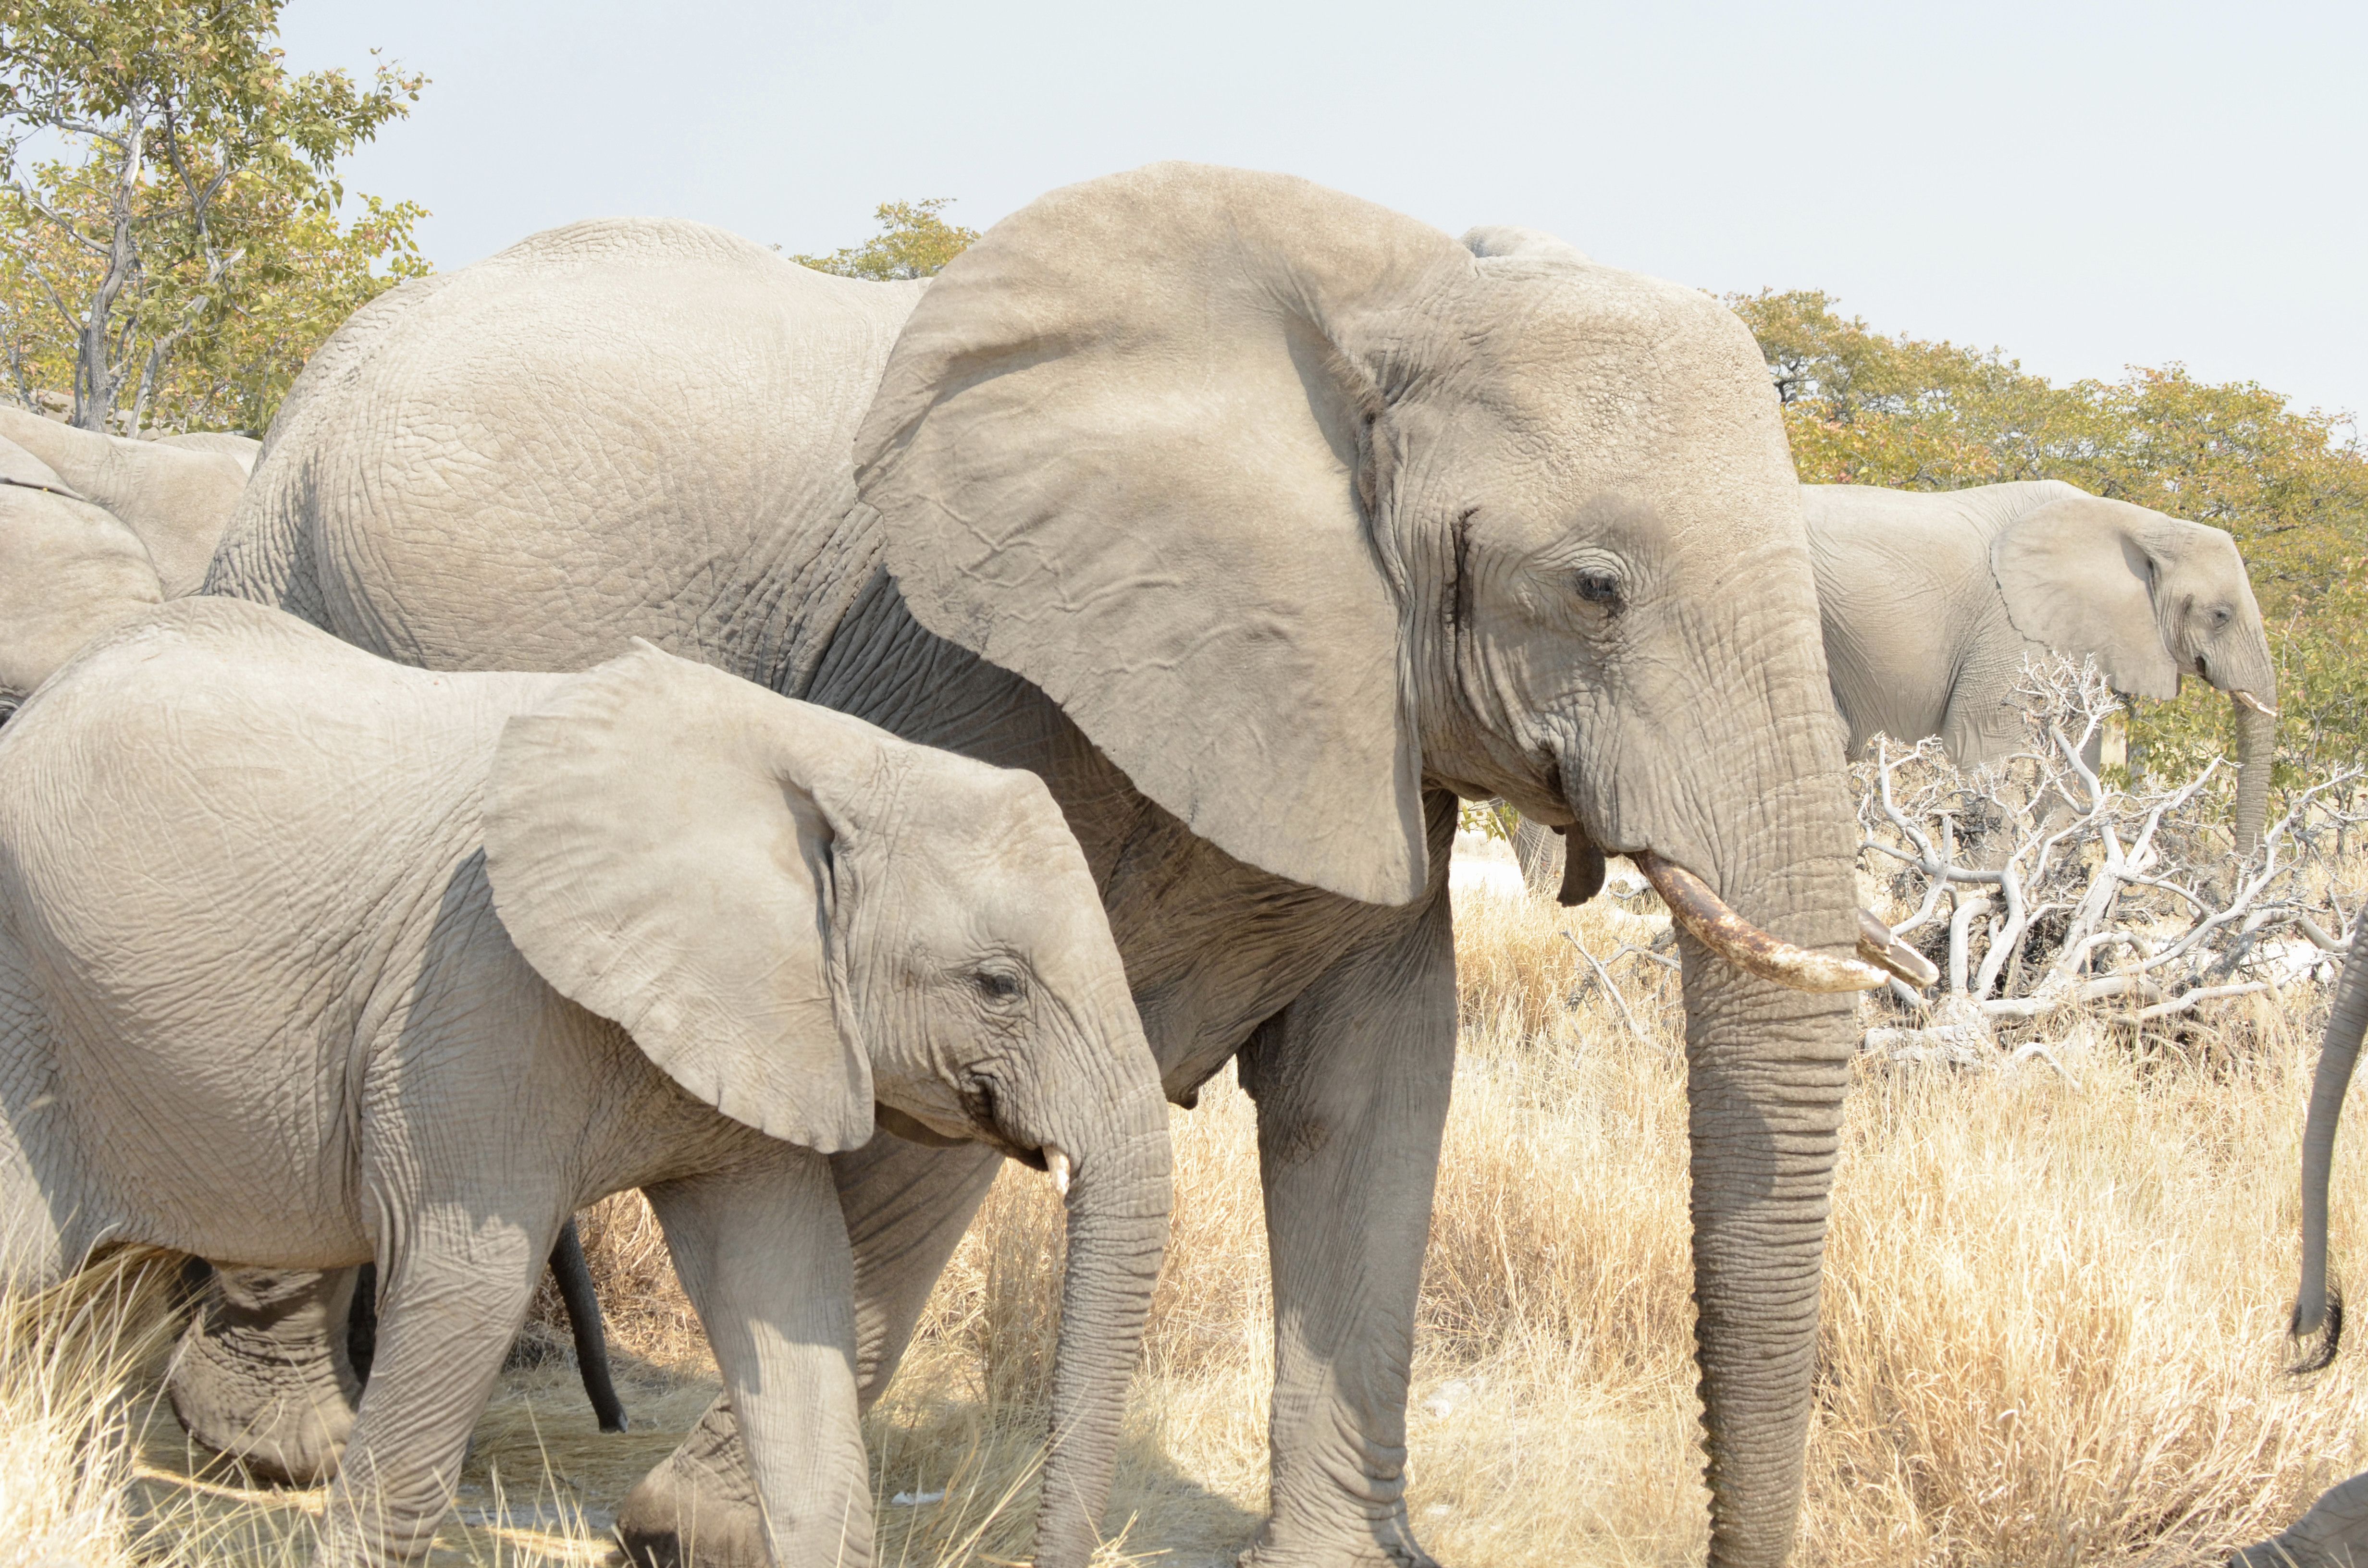 Click picture to see more African Elephants.